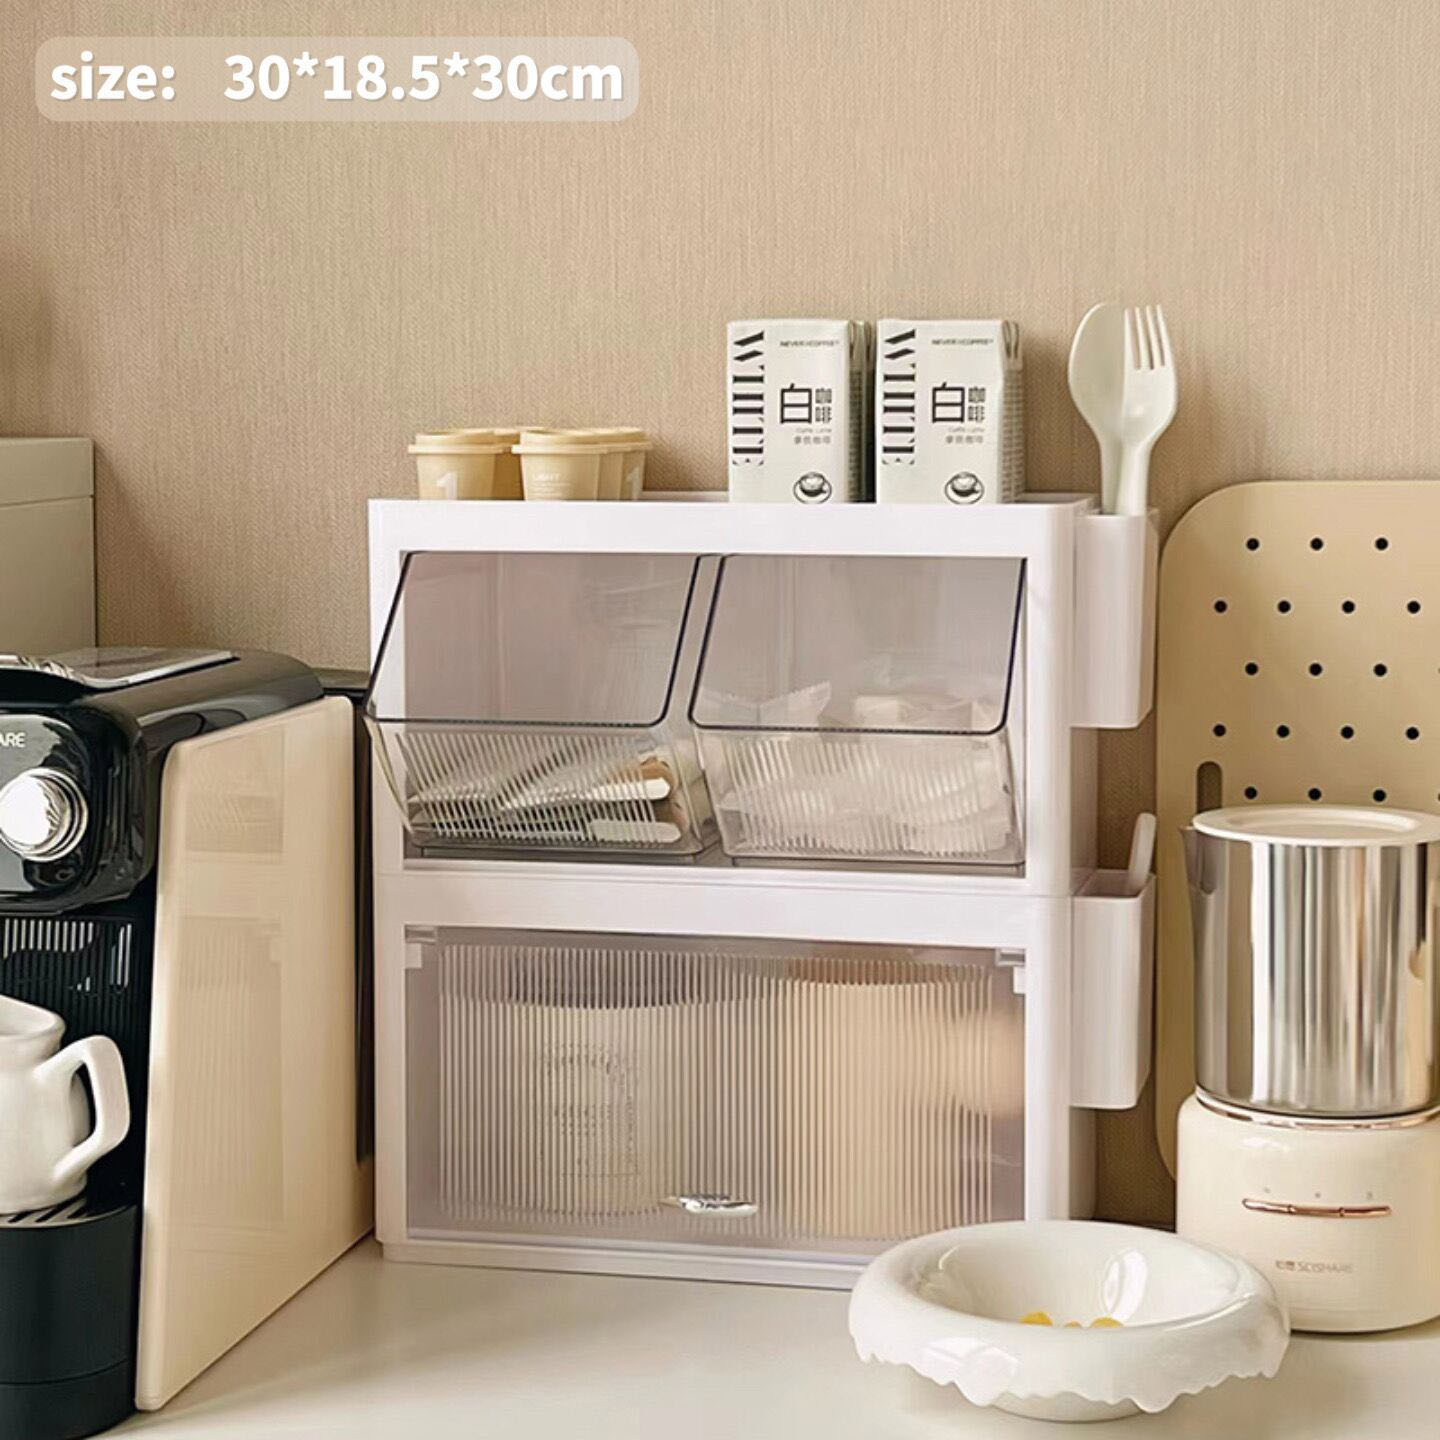 White [ tea shelf   cup shelf ] add order to send 2 side hanging boxes